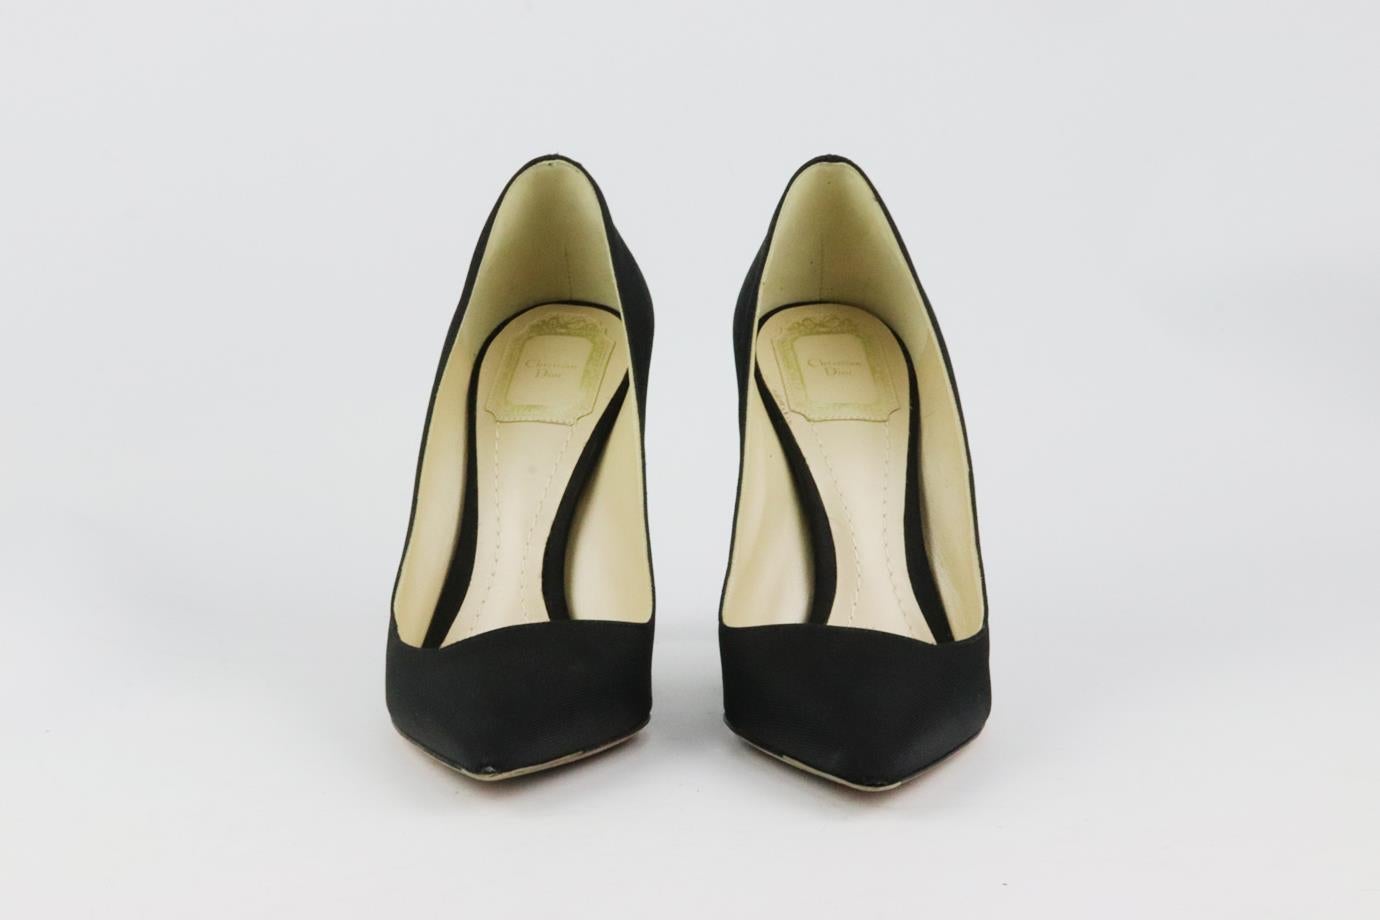 These ‘Songe’ pumps by Christian Dior are a classic style that will never date, made in Italy from black satin, they have sharp pointed toes and striking 89 mm curved perspex heels to take you from morning meetings to dinner with friends. Heel